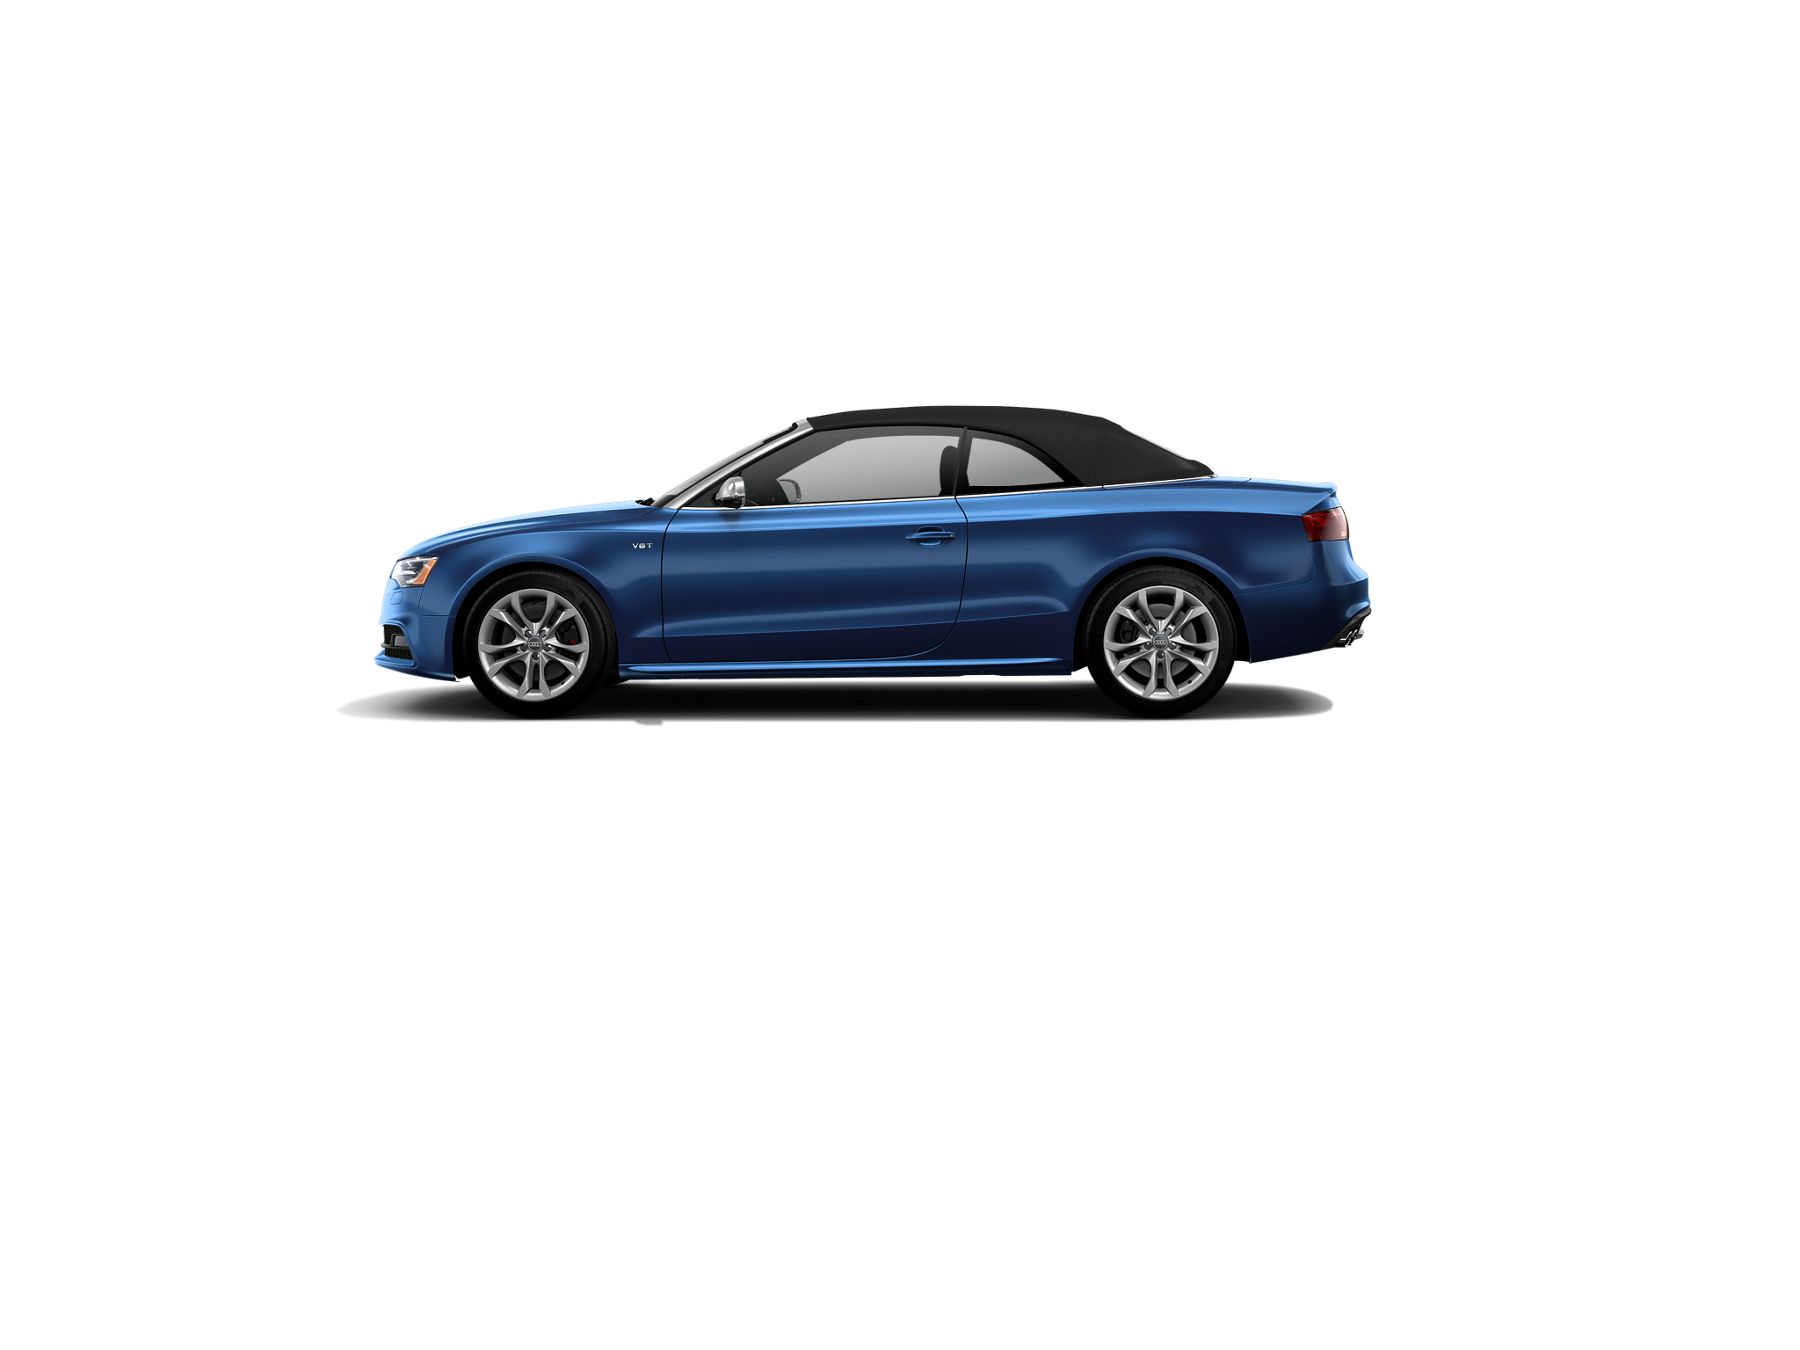 Audi S5 Cabriolet side view